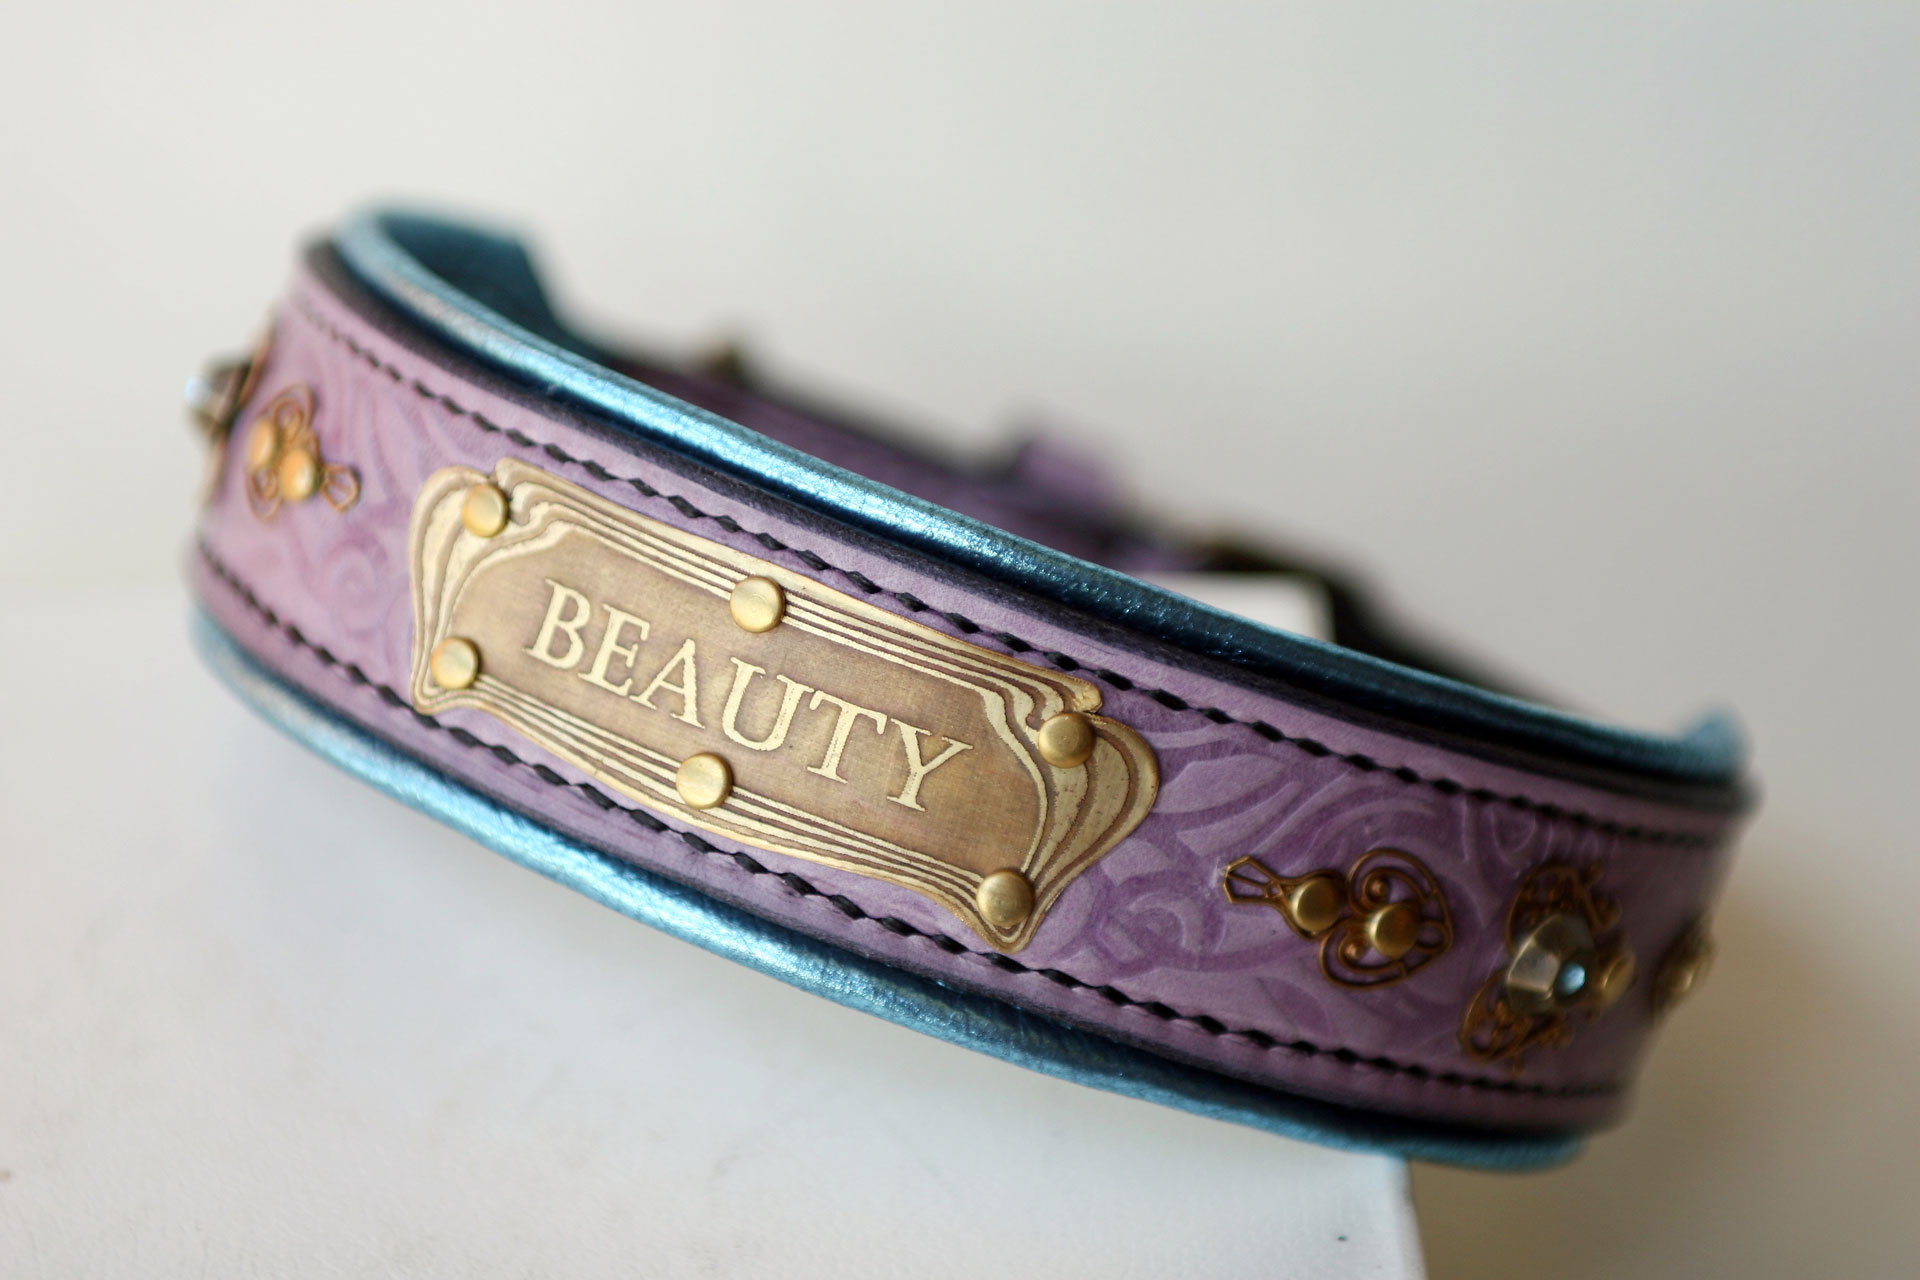 blinged out dog collars